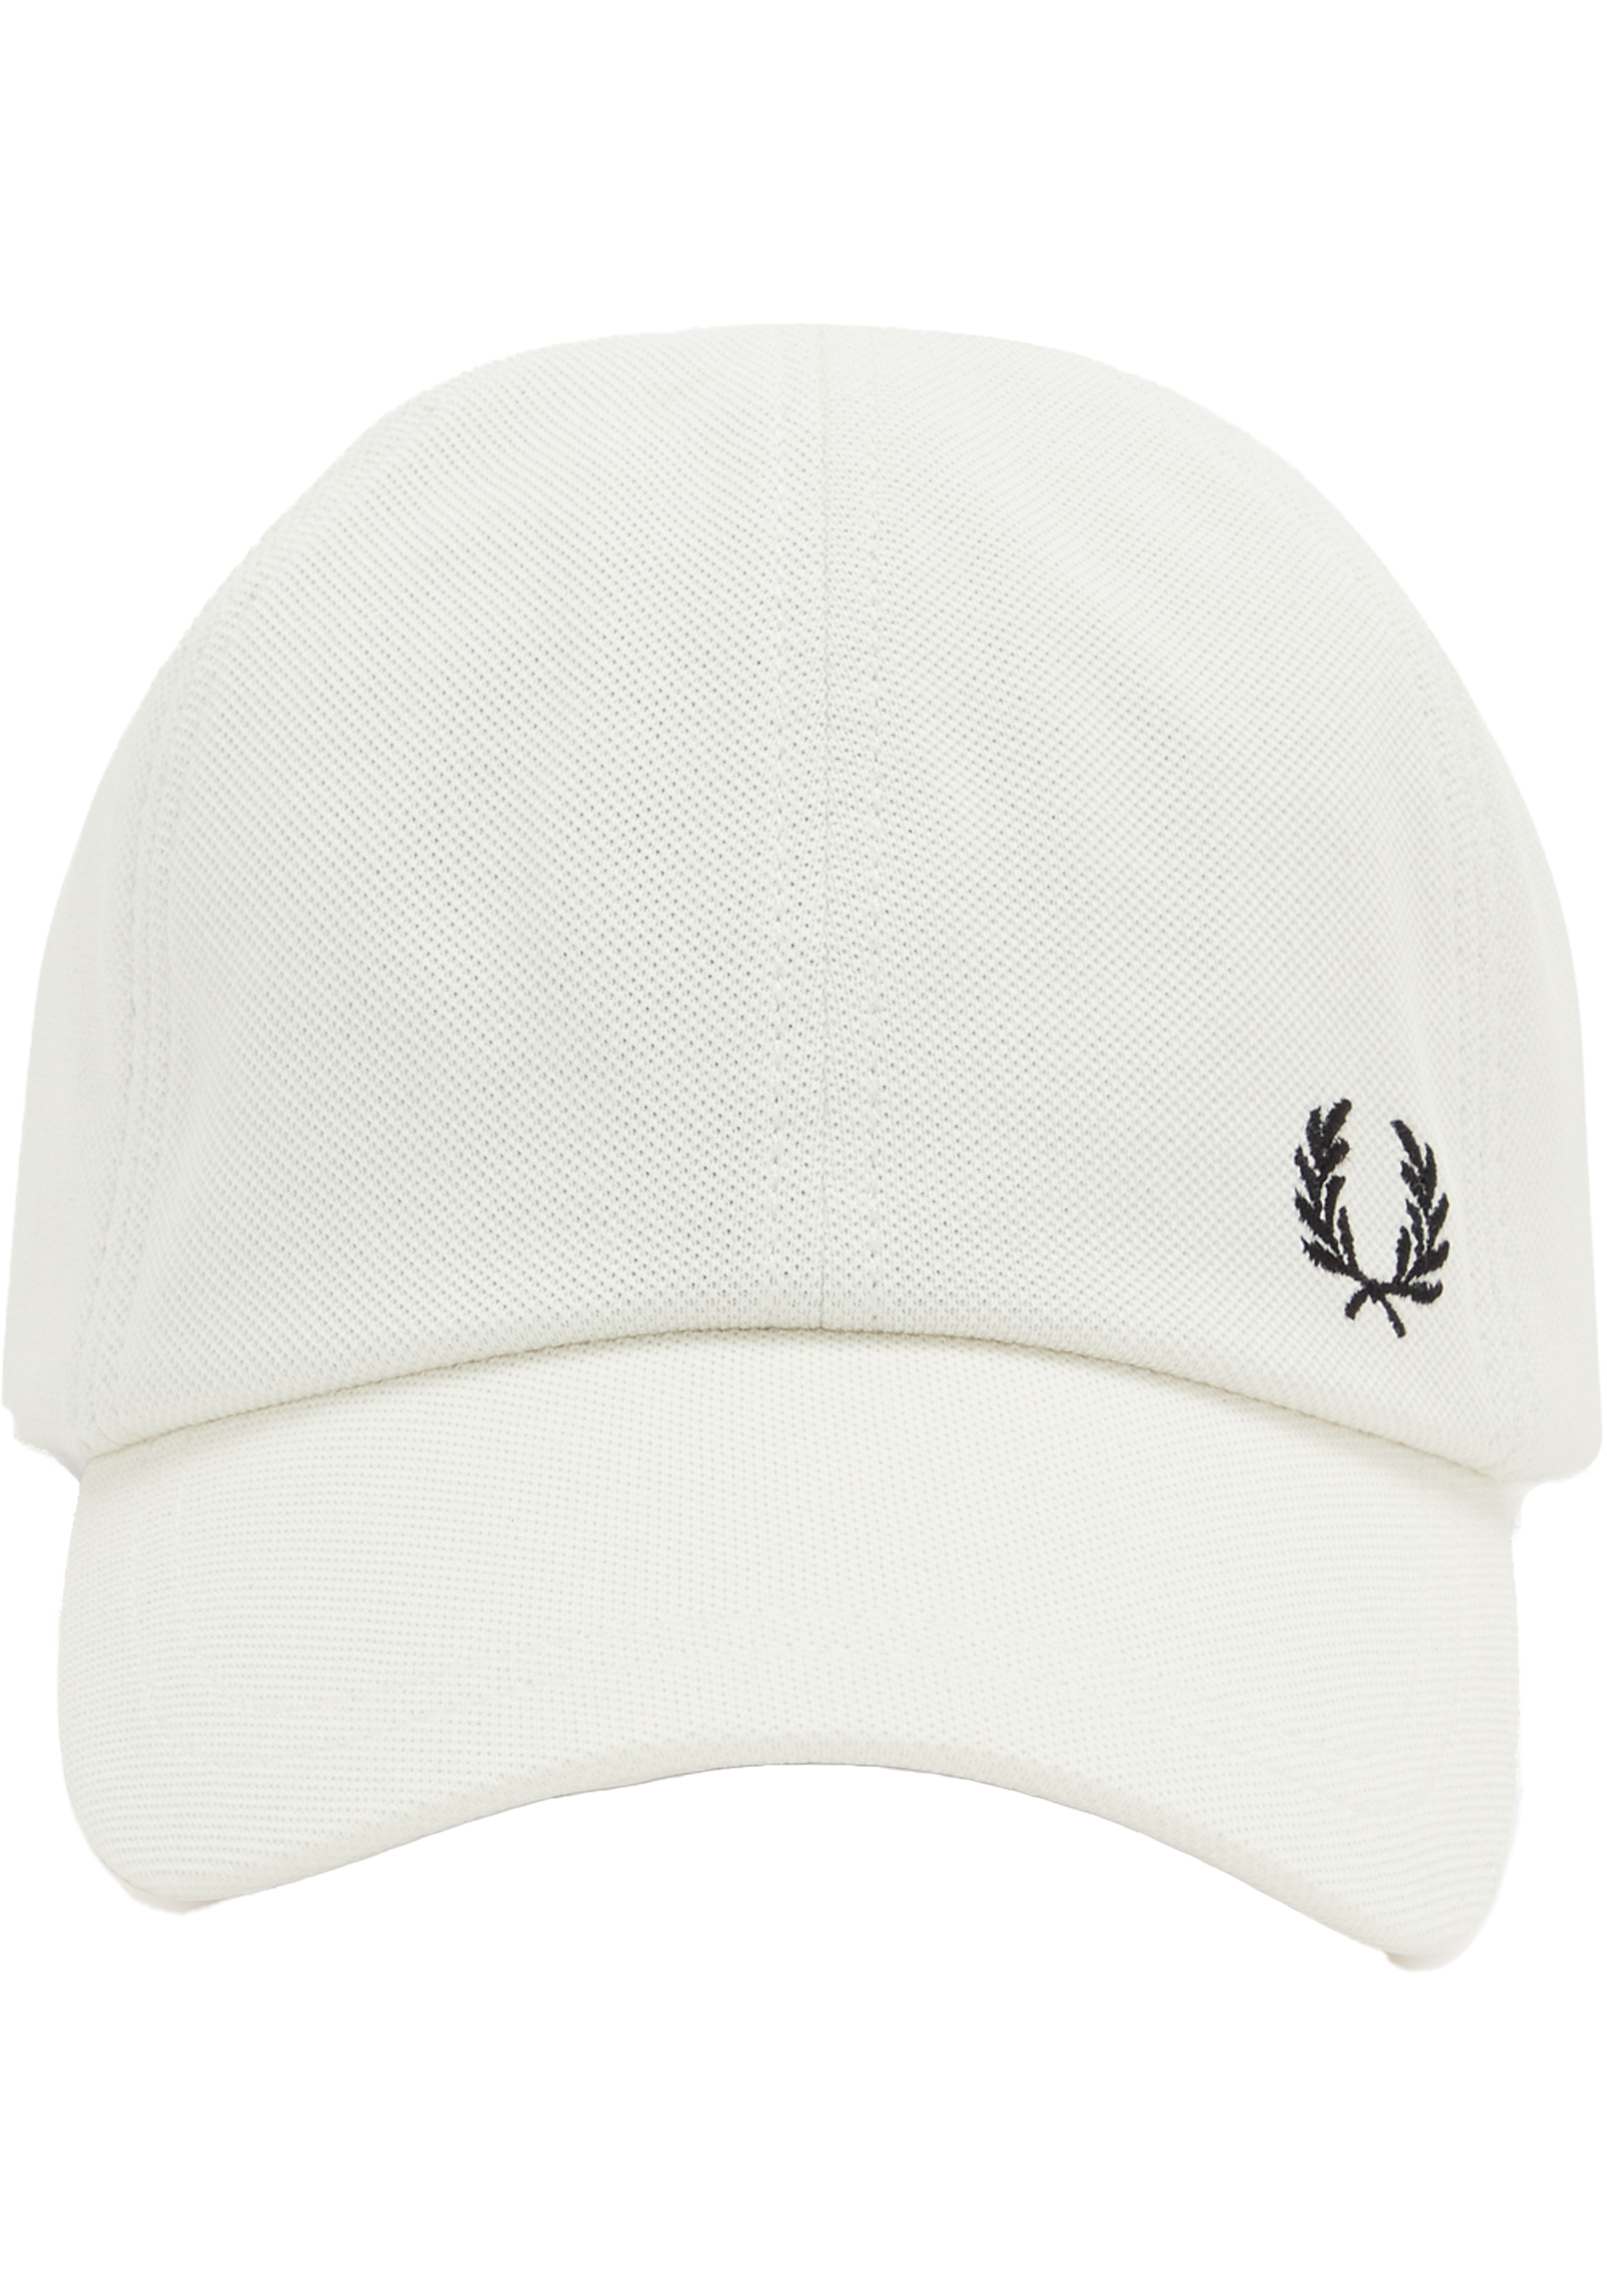 Fred Perry Pique Classic Cap, heren pet, wit